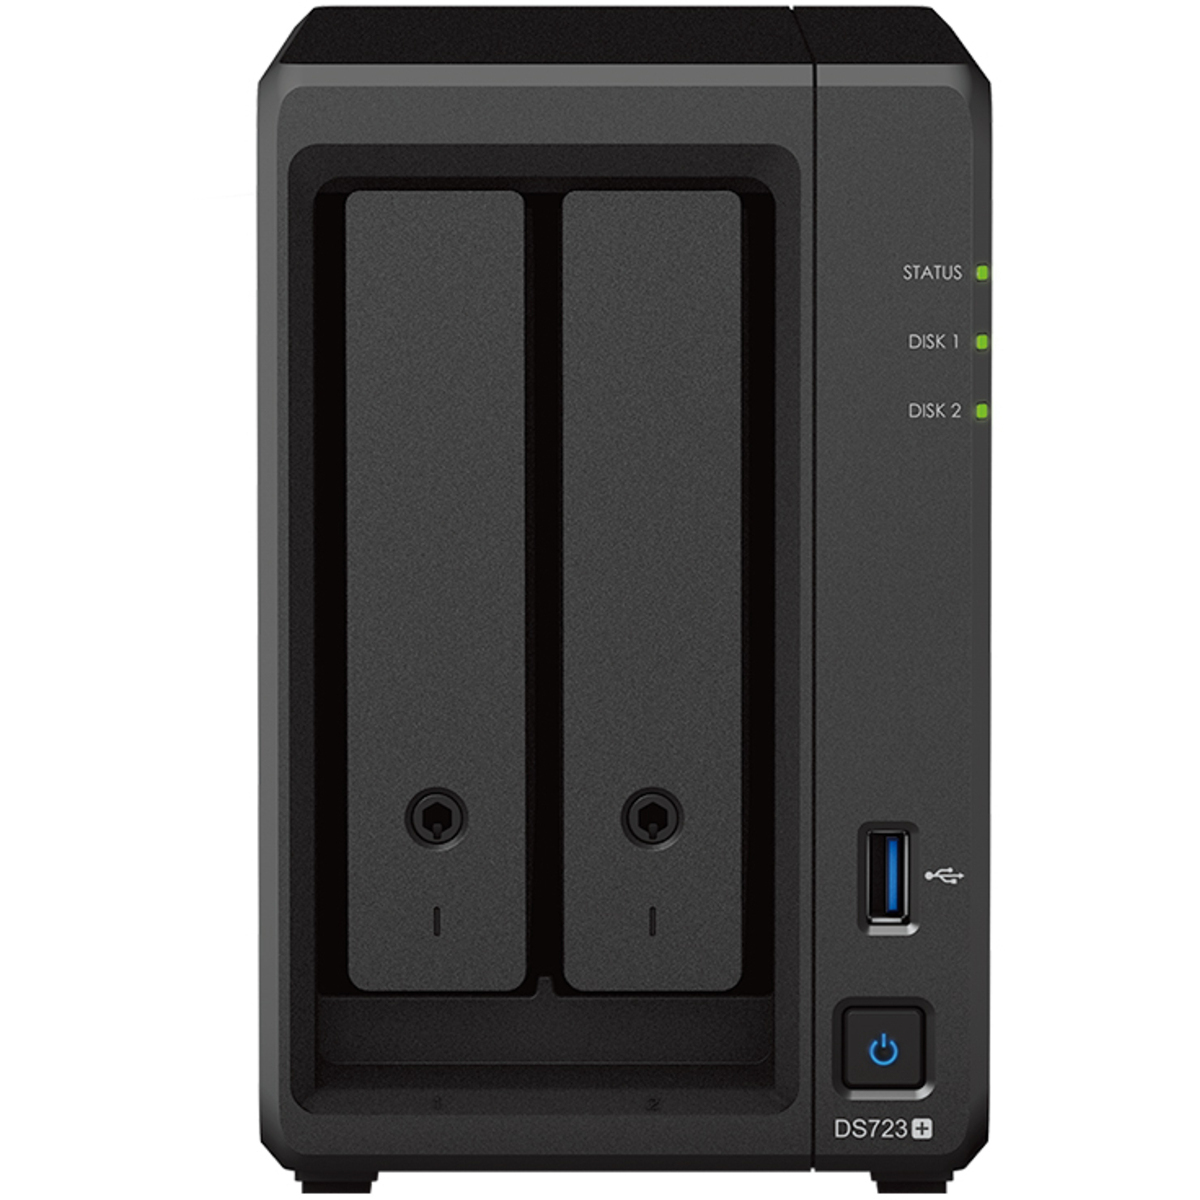 Synology DiskStation DS723+ 500gb 2-Bay Desktop Multimedia / Power User / Business NAS - Network Attached Storage Device 1x500gb Crucial MX500 CT500MX500SSD1 2.5 560/510MB/s SATA 6Gb/s SSD CONSUMER Class Drives Installed - Burn-In Tested DiskStation DS723+